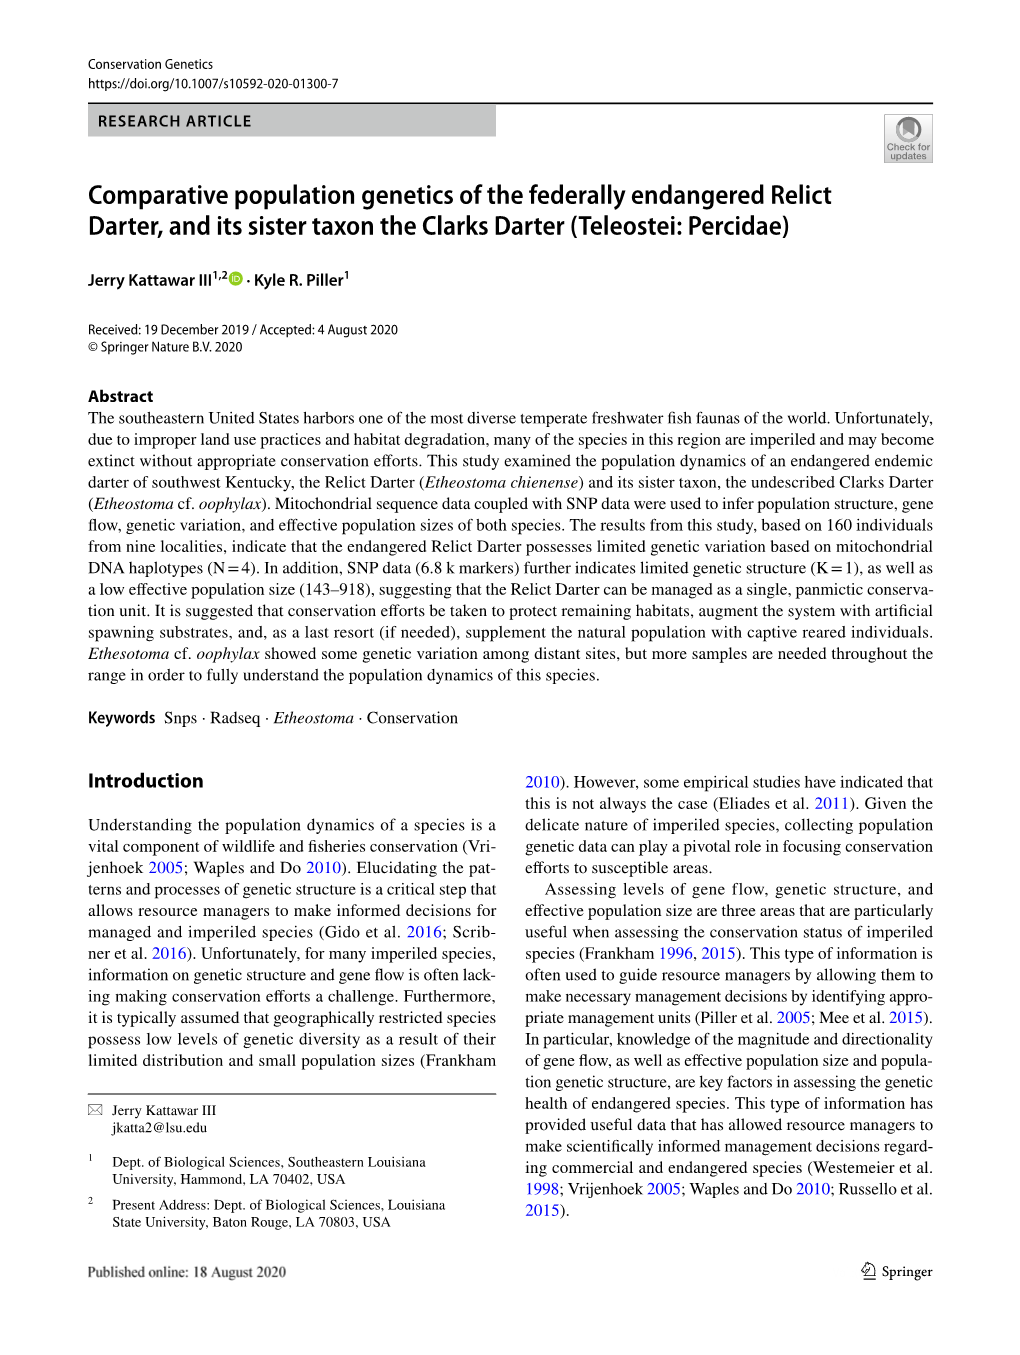 Comparative Population Genetics of the Federally Endangered Relict Darter, and Its Sister Taxon the Clarks Darter (Teleostei: Percidae)